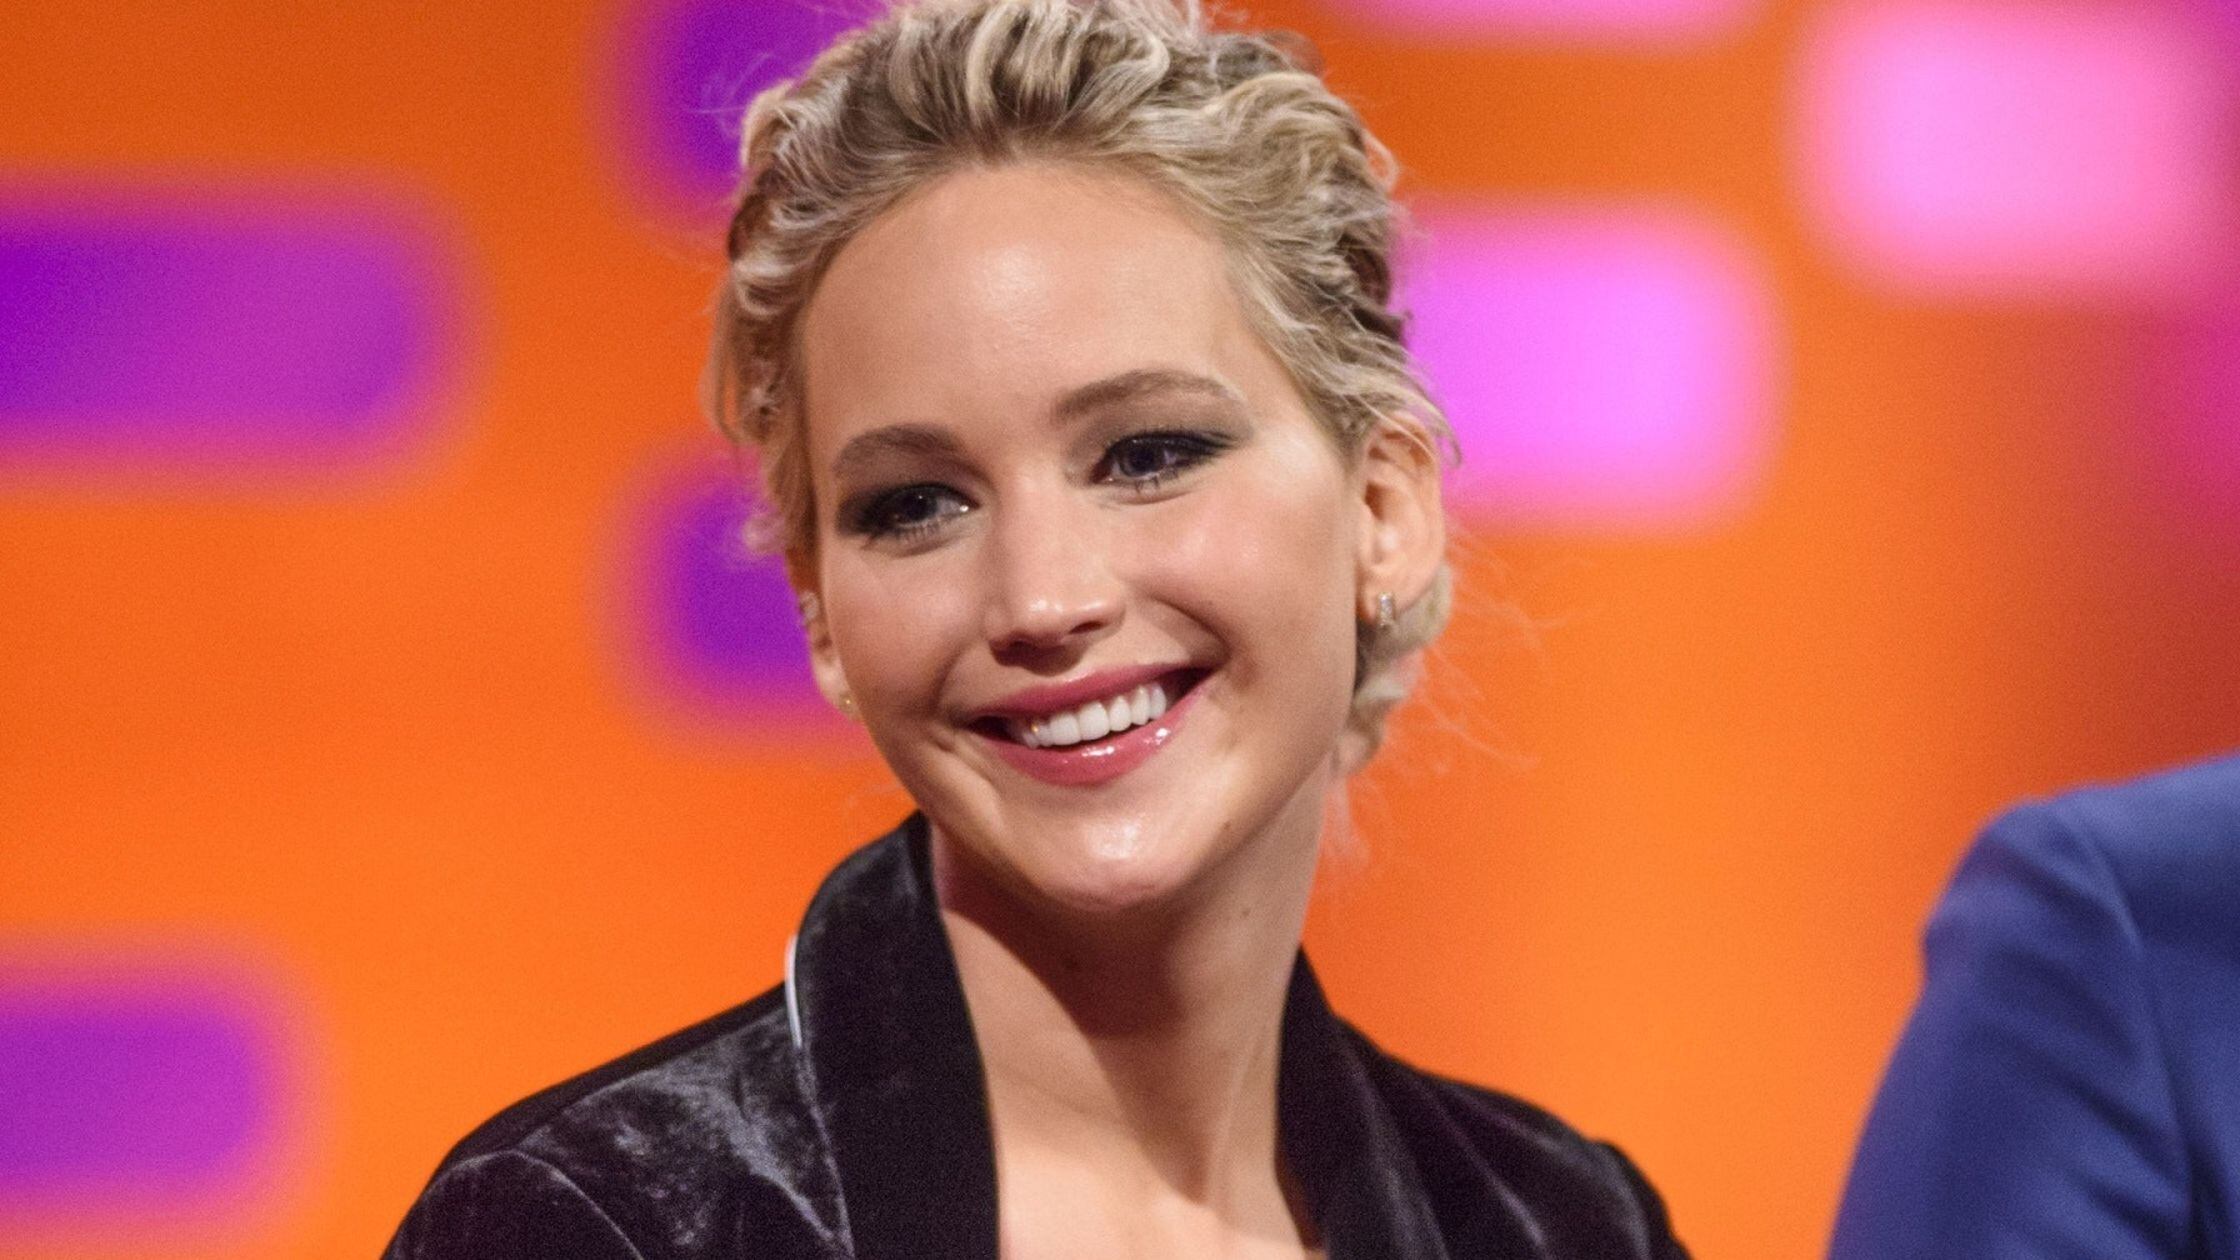 The Hunger Games actress took on a new, and rather hilarious, role on US TV.